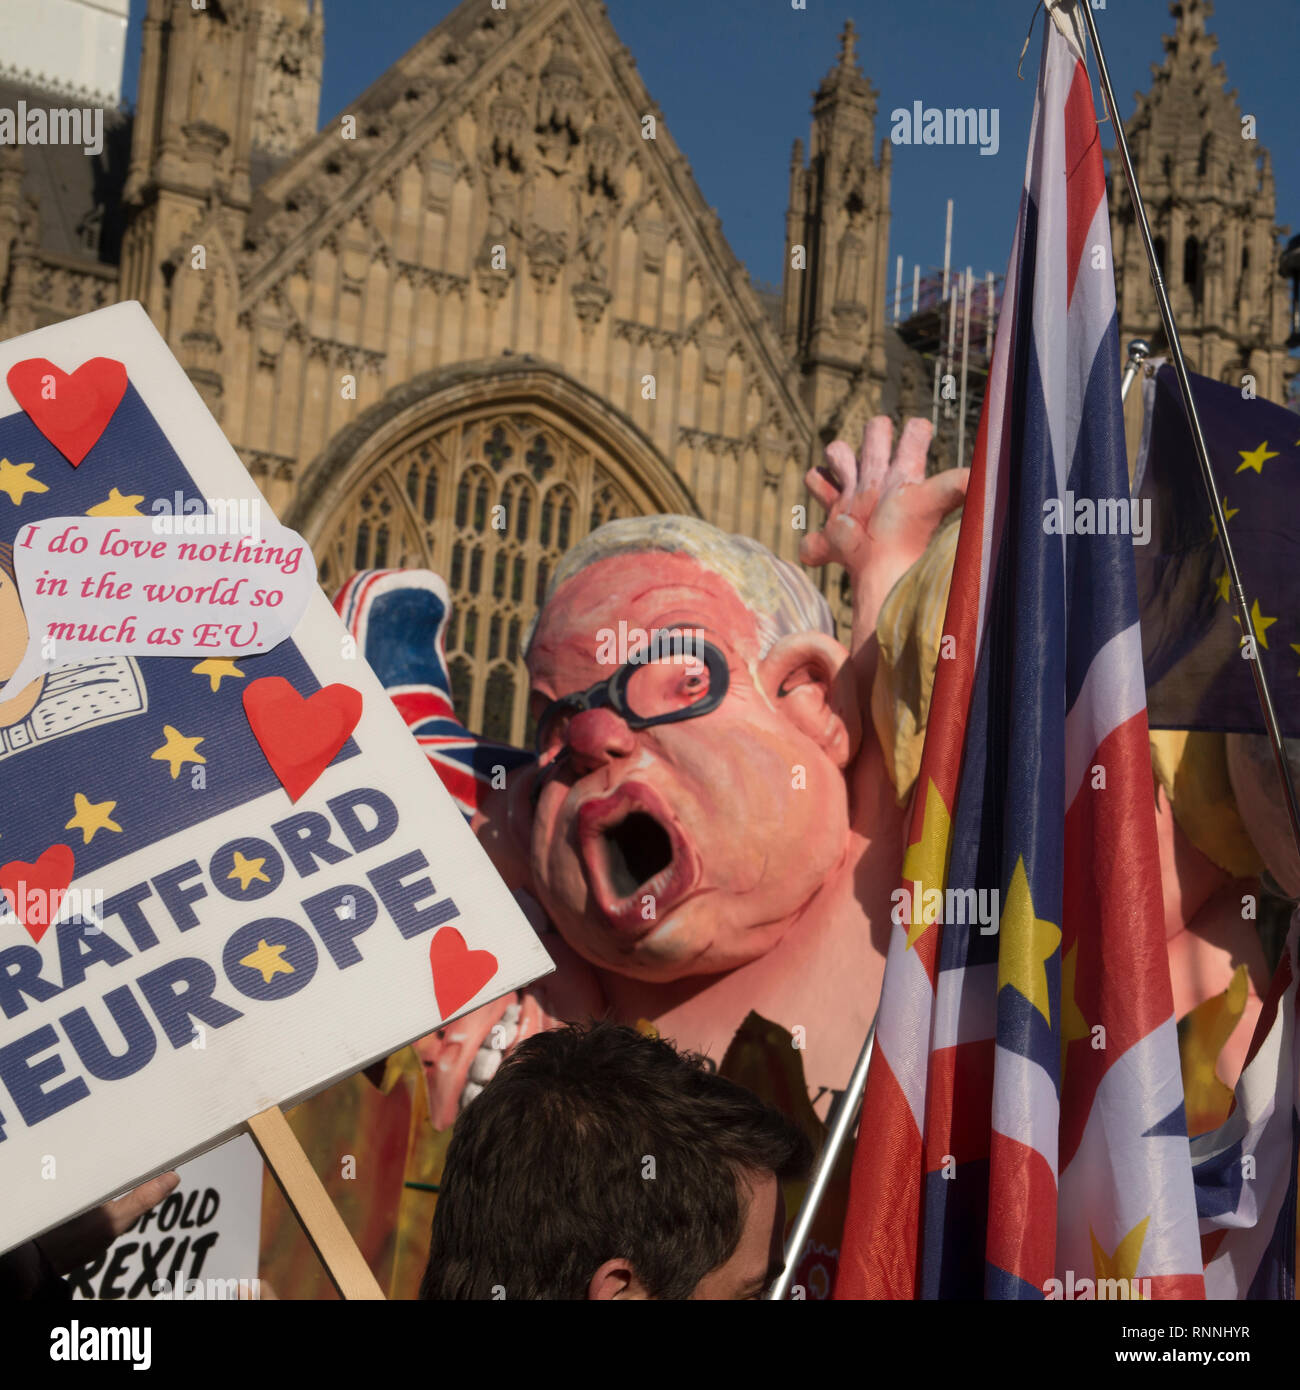 The Brexit Monstrosity passing SODEM at the St Valentines Day, Cake Not Hate event opposing Brexit. Stock Photo